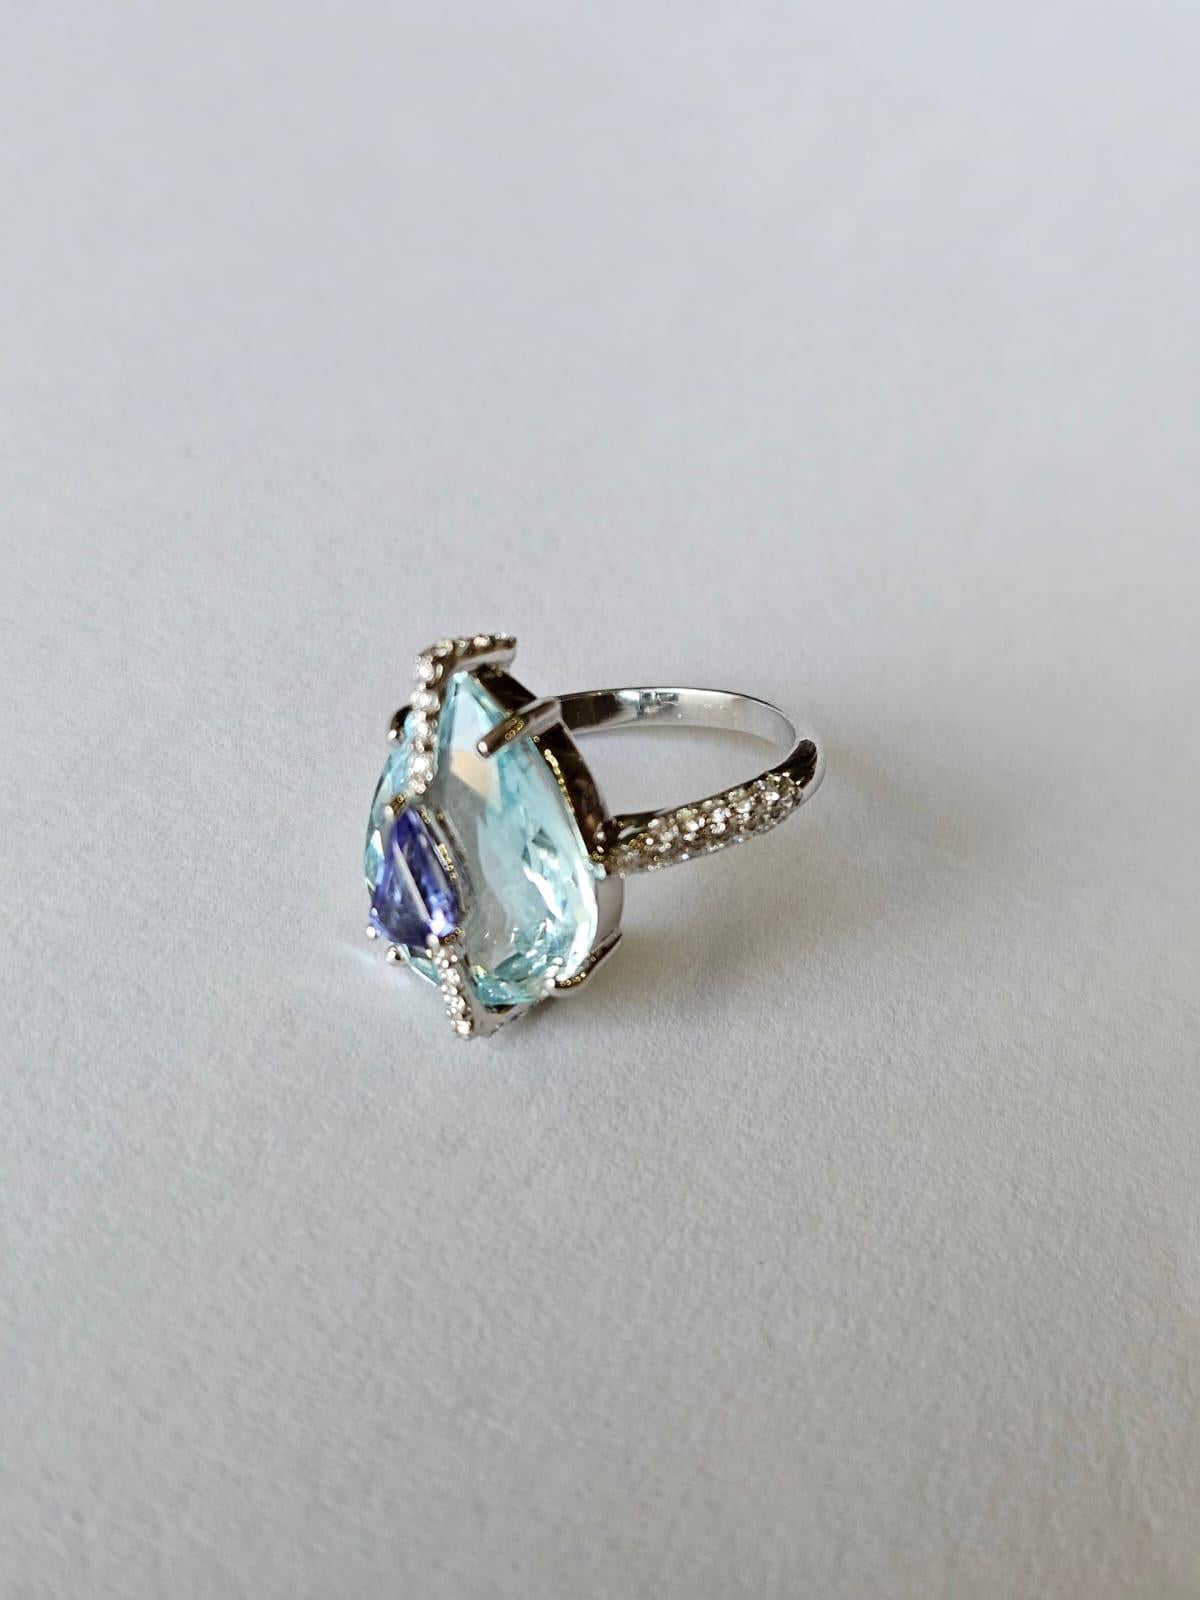 A very beautiful and gorgeous, modern style, Aquamarine & Tanzanite Cocktail /Engagement Ring set in 18K White Gold & Diamonds. The weight of the pear shaped Aquamarine is 5.61 carats. The weight of the Shield shaped Tanzanite is 0.38 carats. The